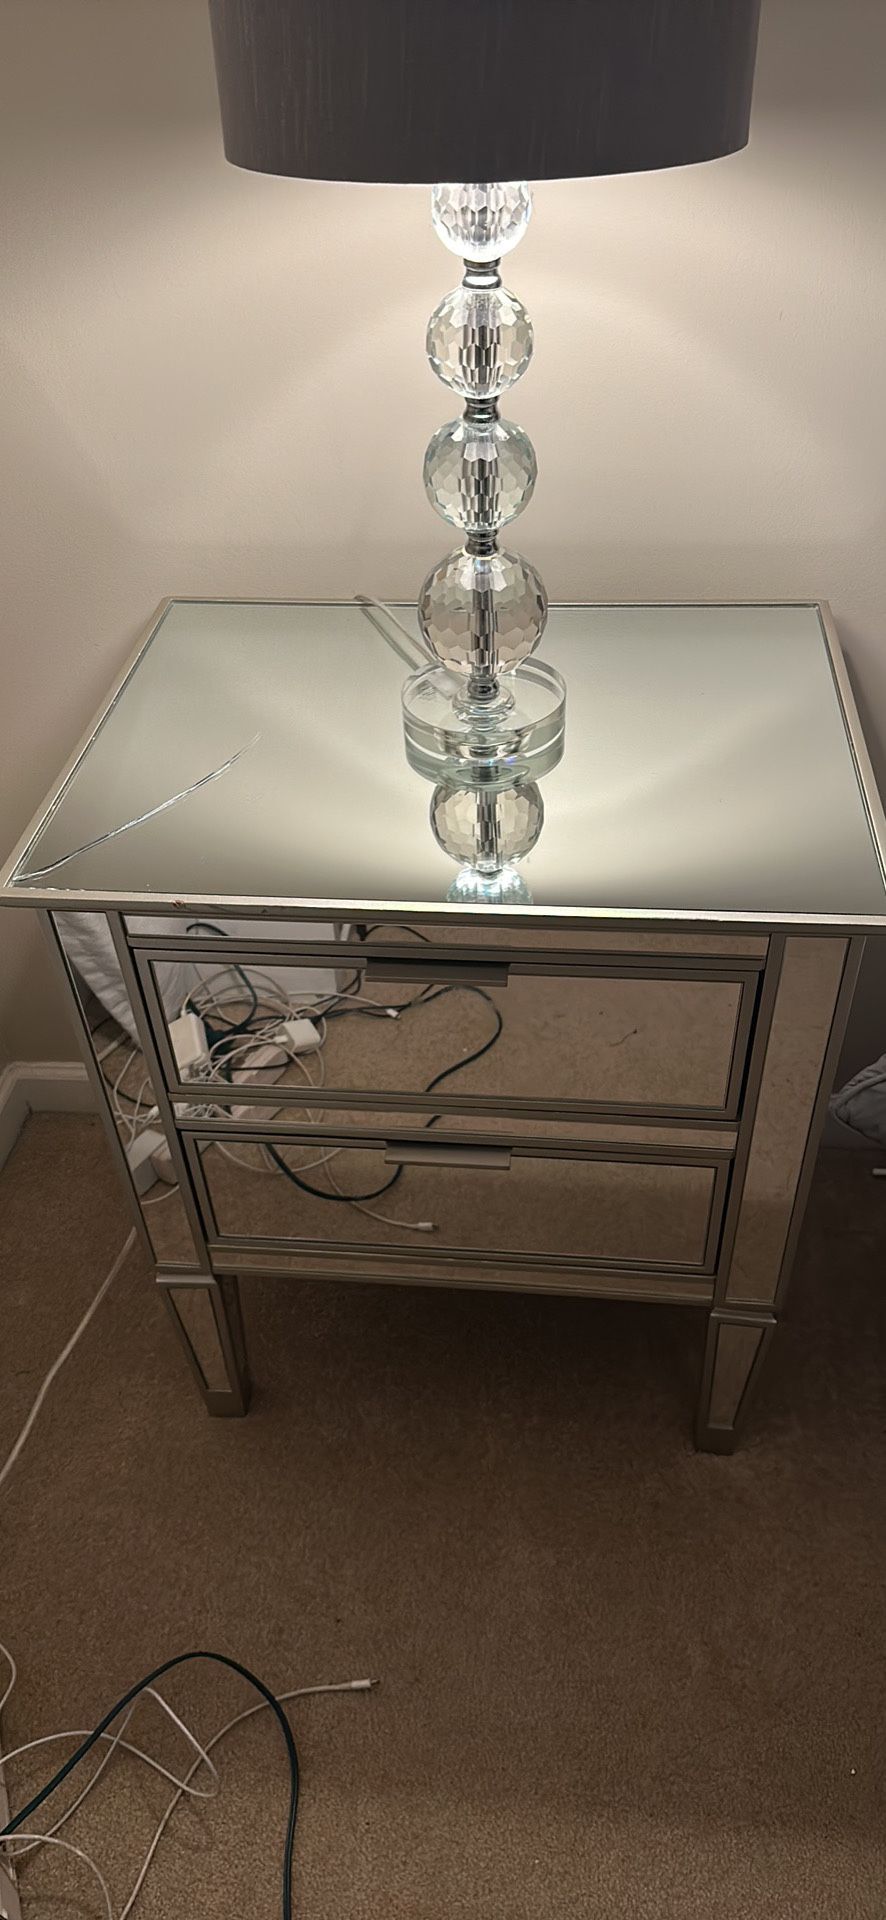 Beautiful Pottery barn Mirrored Nightstand Side Table Solid Wood Heavy 